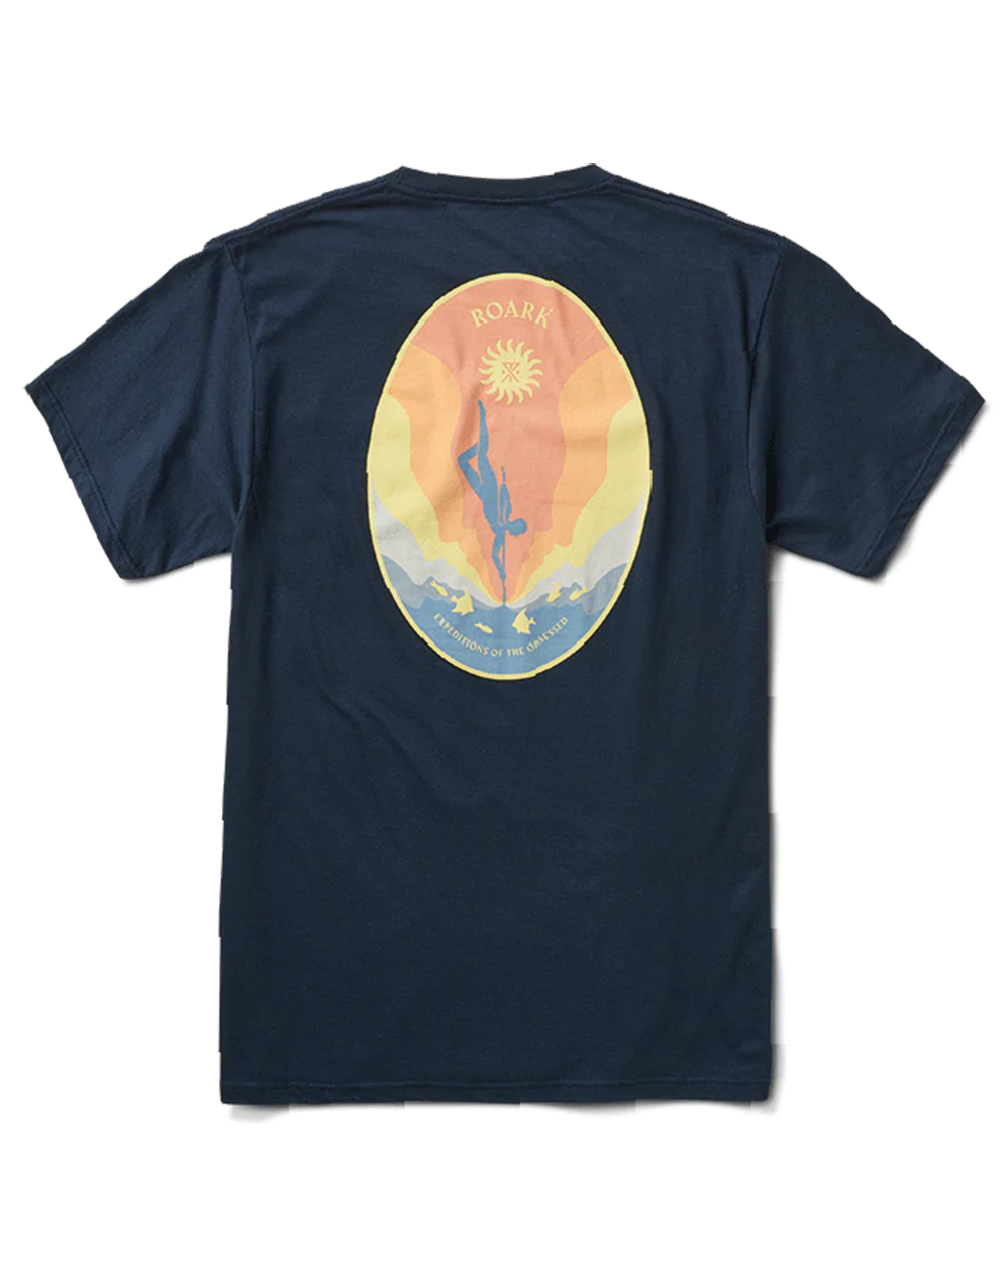 ROARK Expendetions Of The Obsessed Mens Tee - NAVY | Tillys